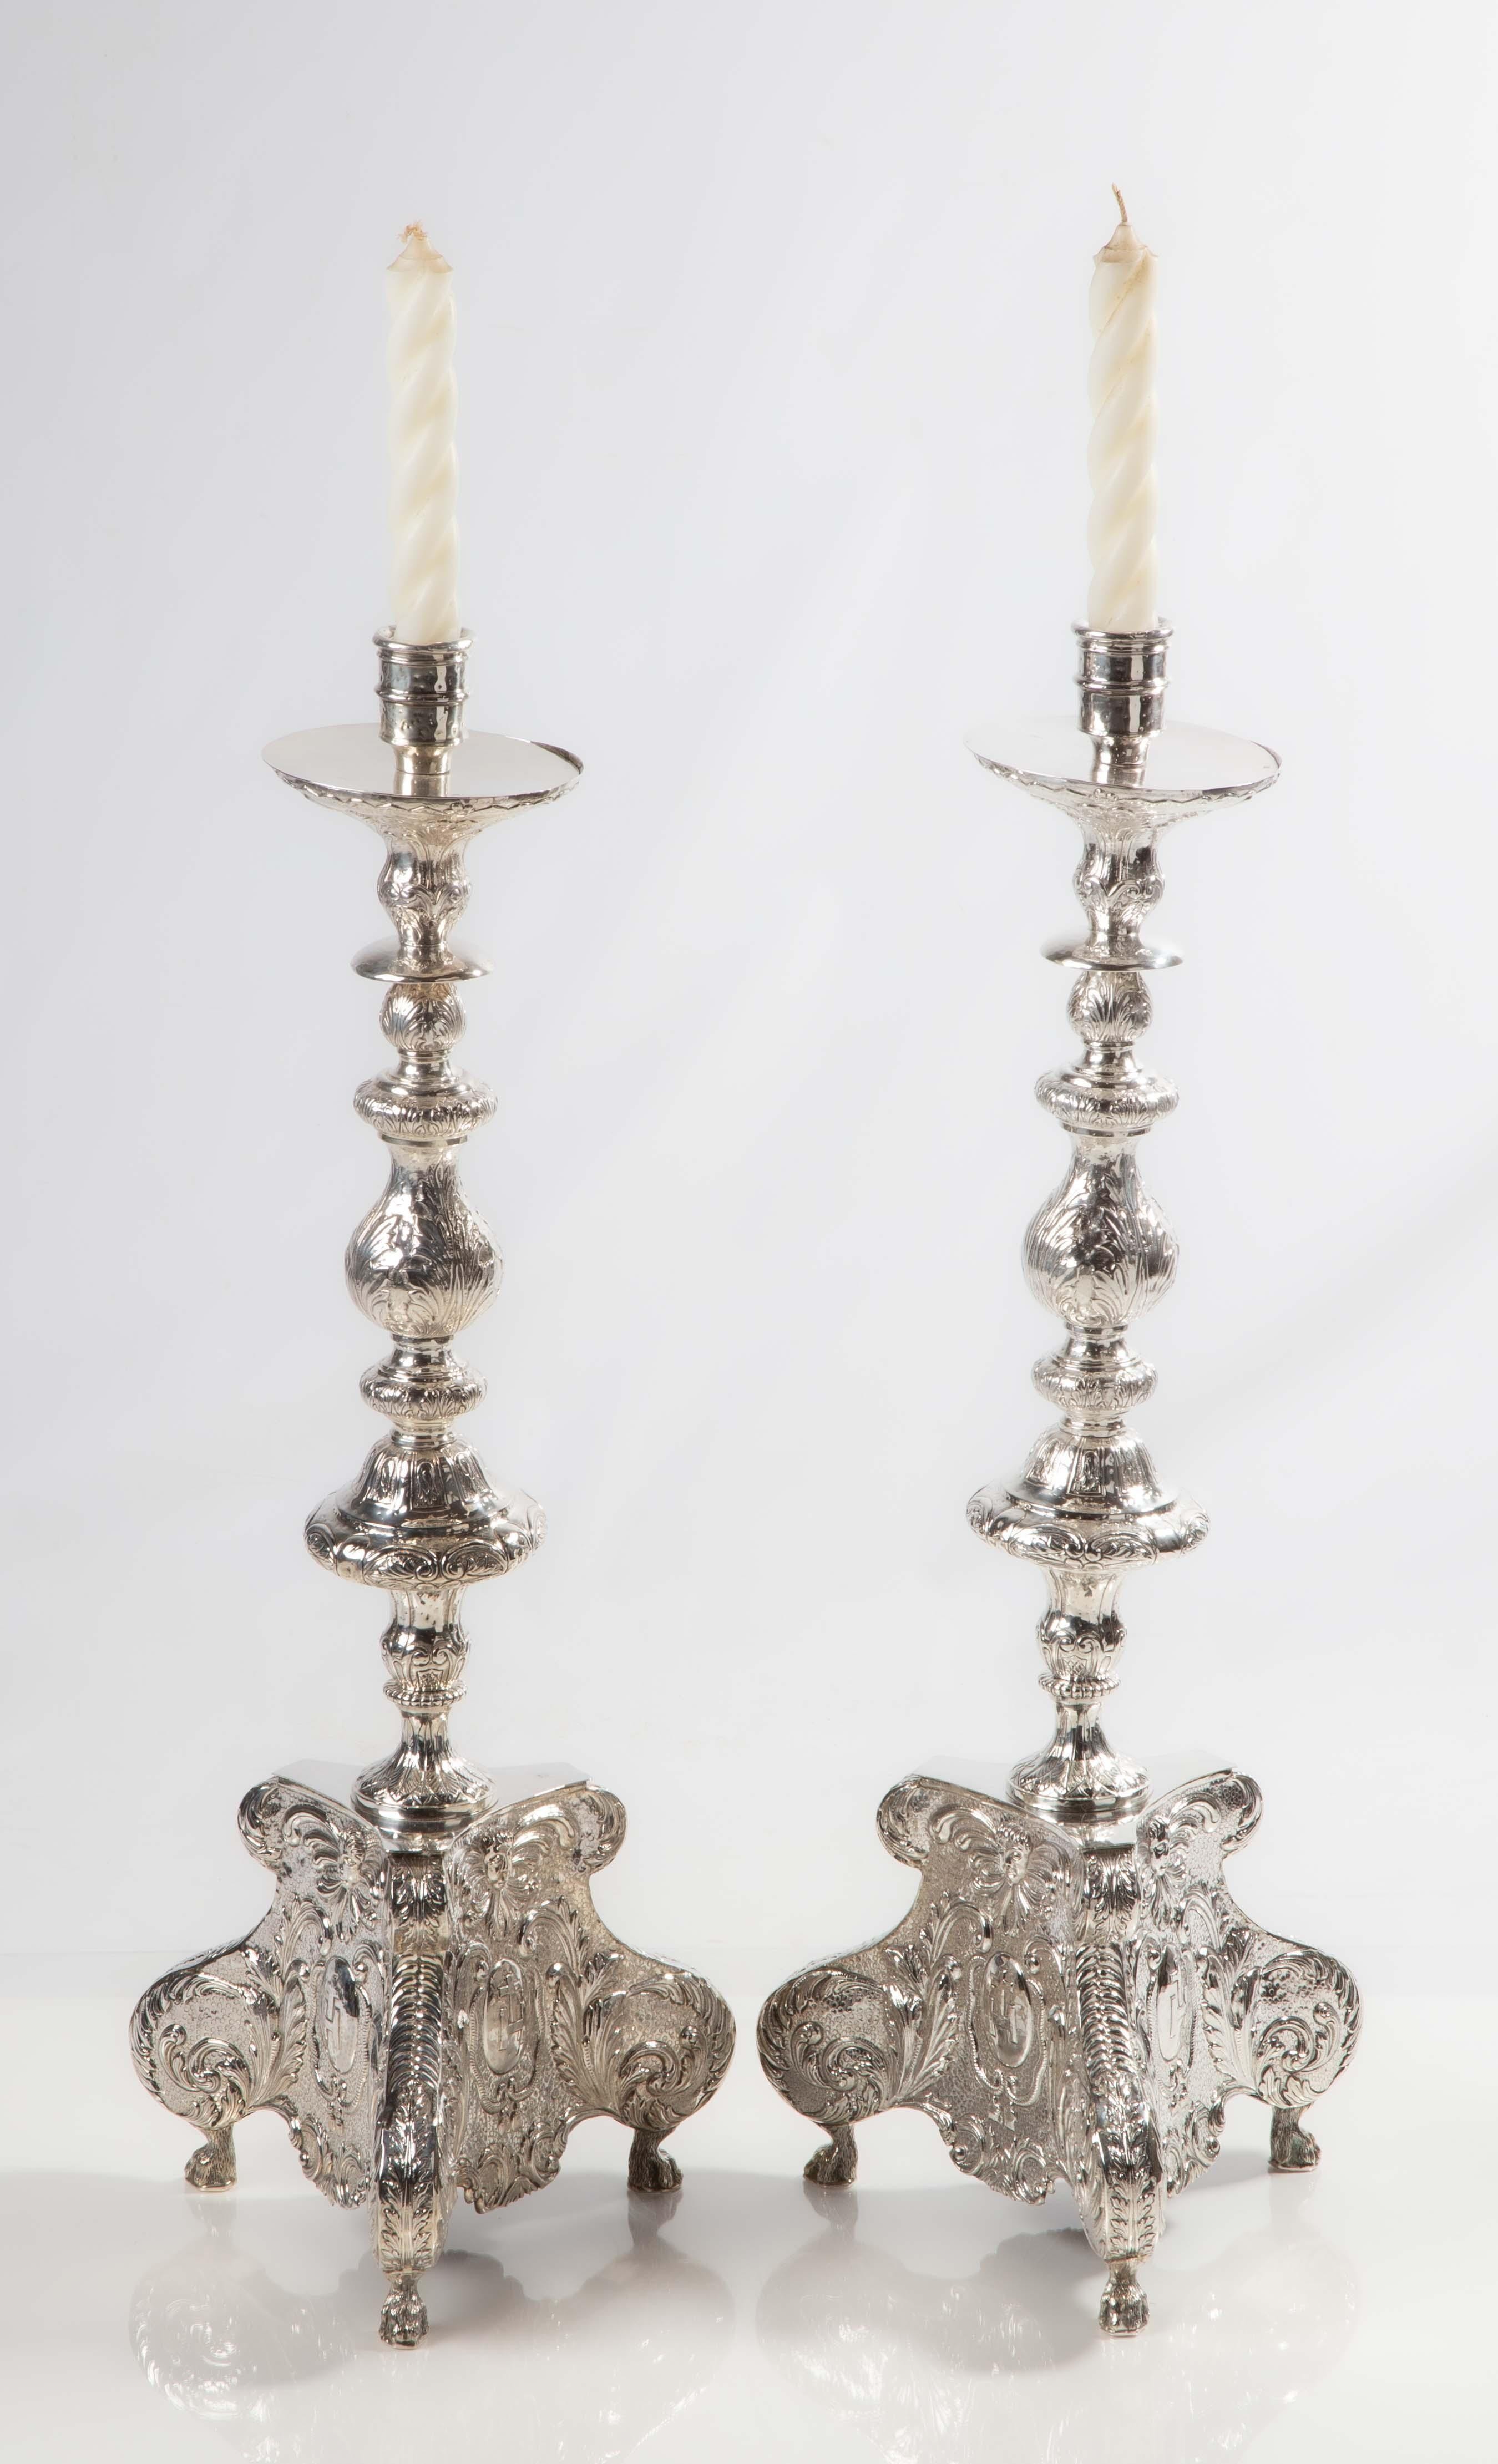 PAIR OF LARGE EARLY SPANISH OR 352b00